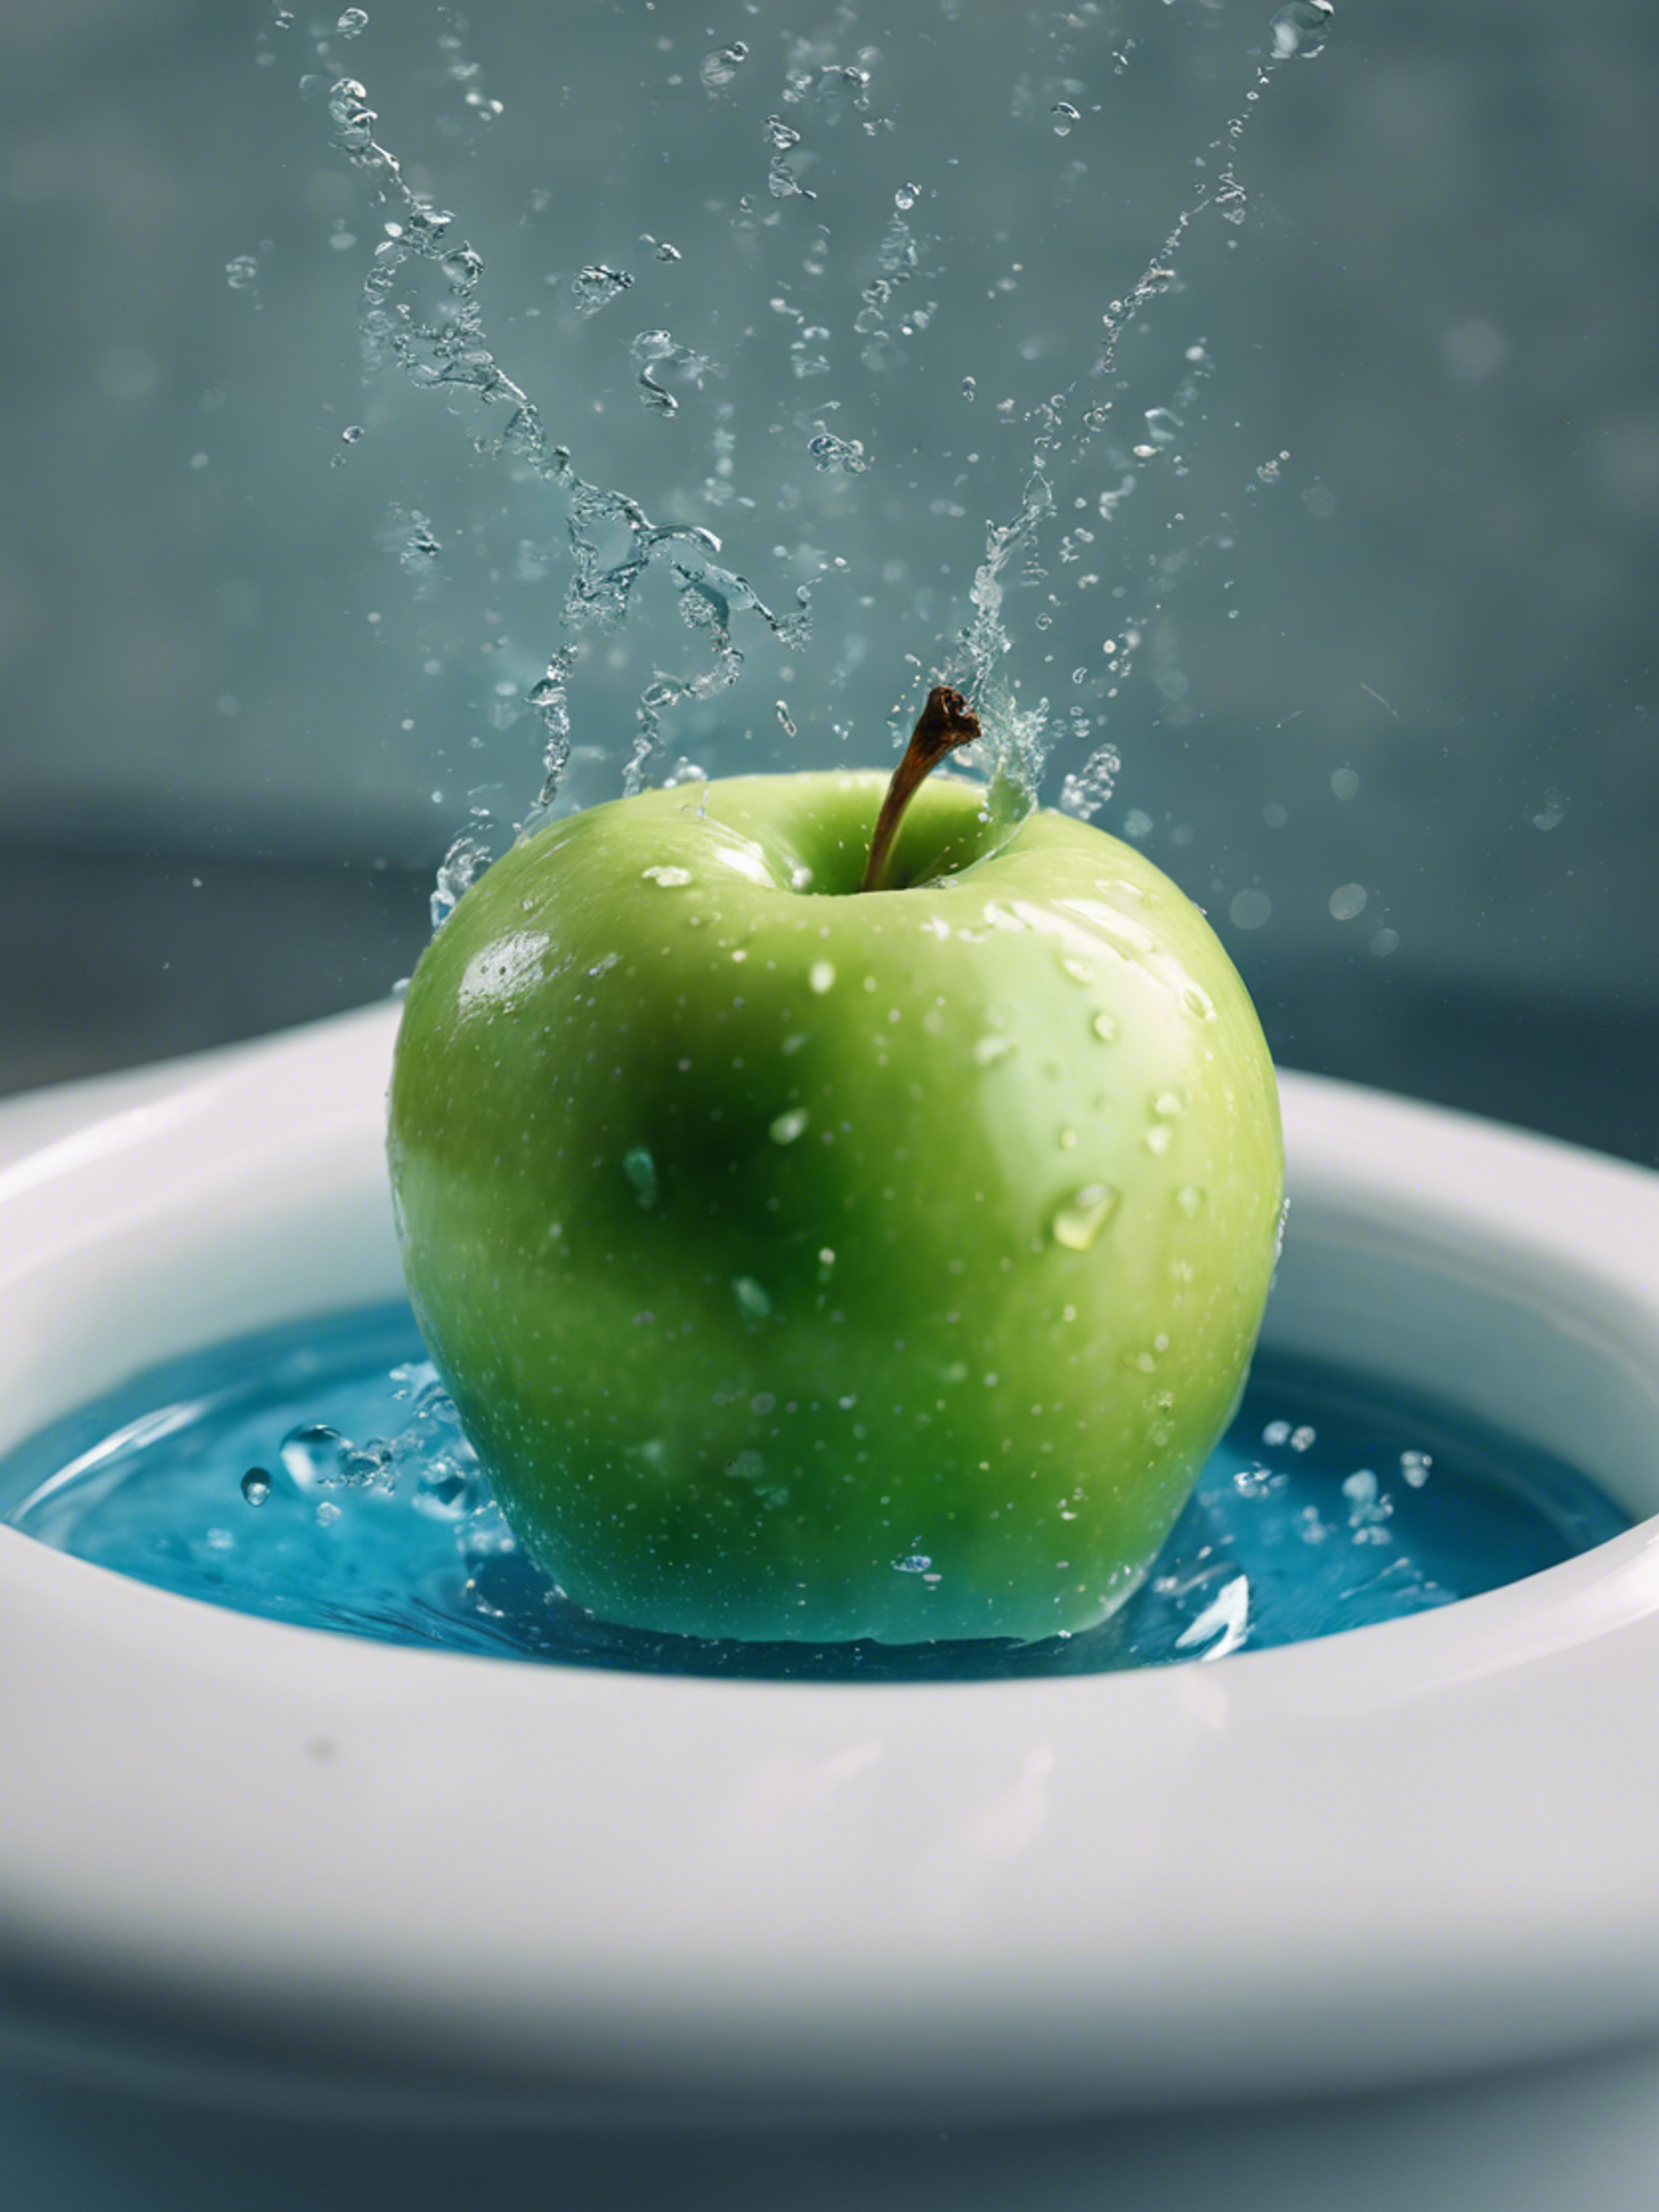 A green apple falling into a basin filled with azure blue water. טפט[a9bb5407cd4a4f929343]